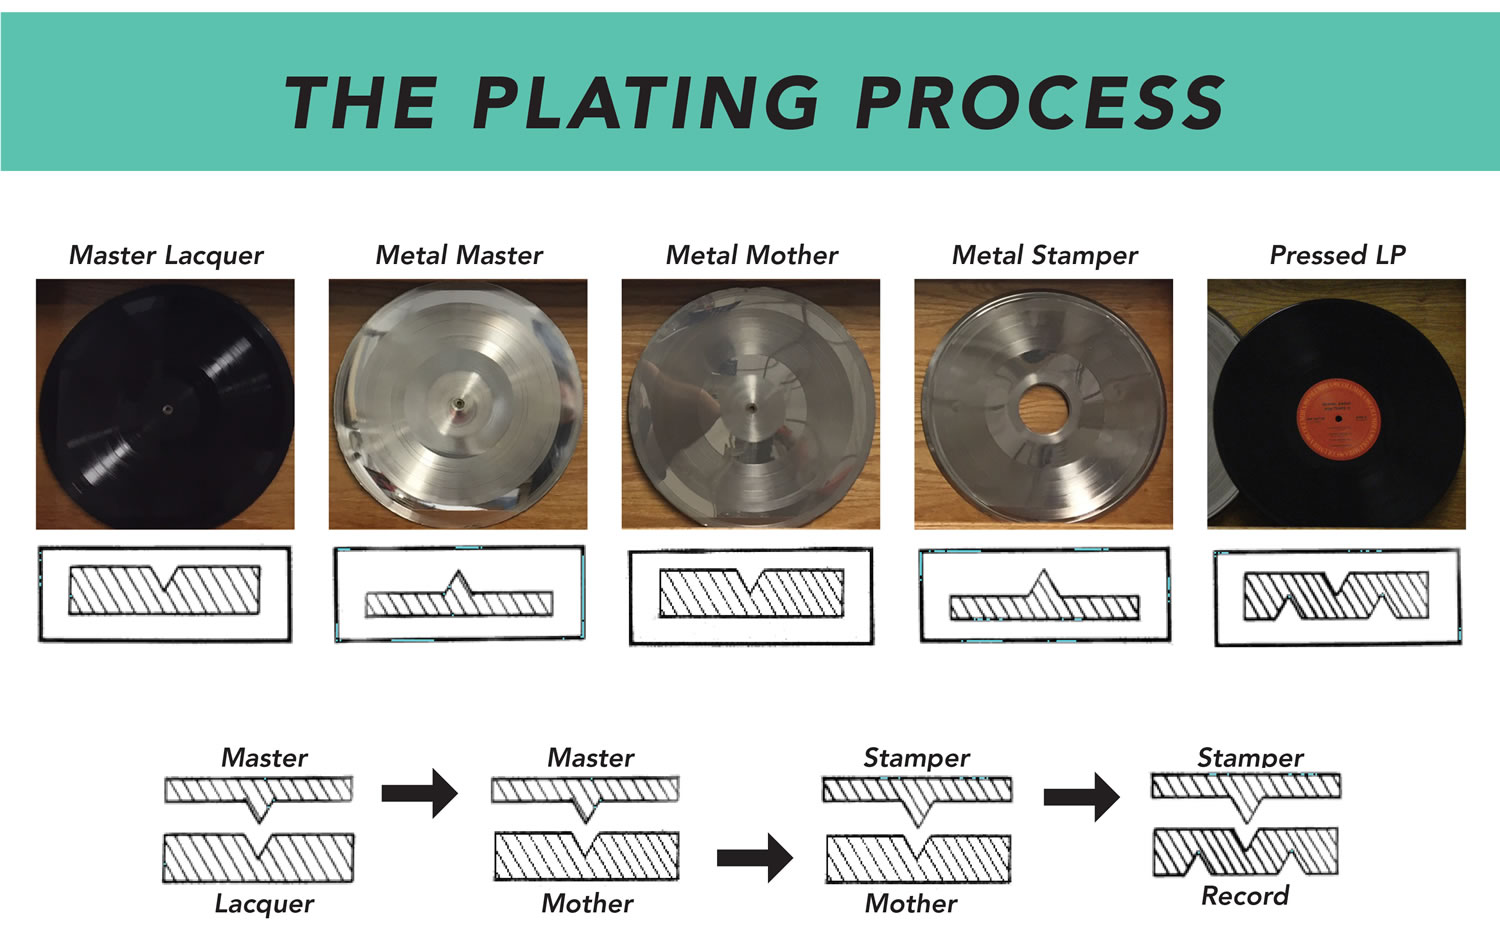 How splatter vinyl records are made - UnifiedManufacturing